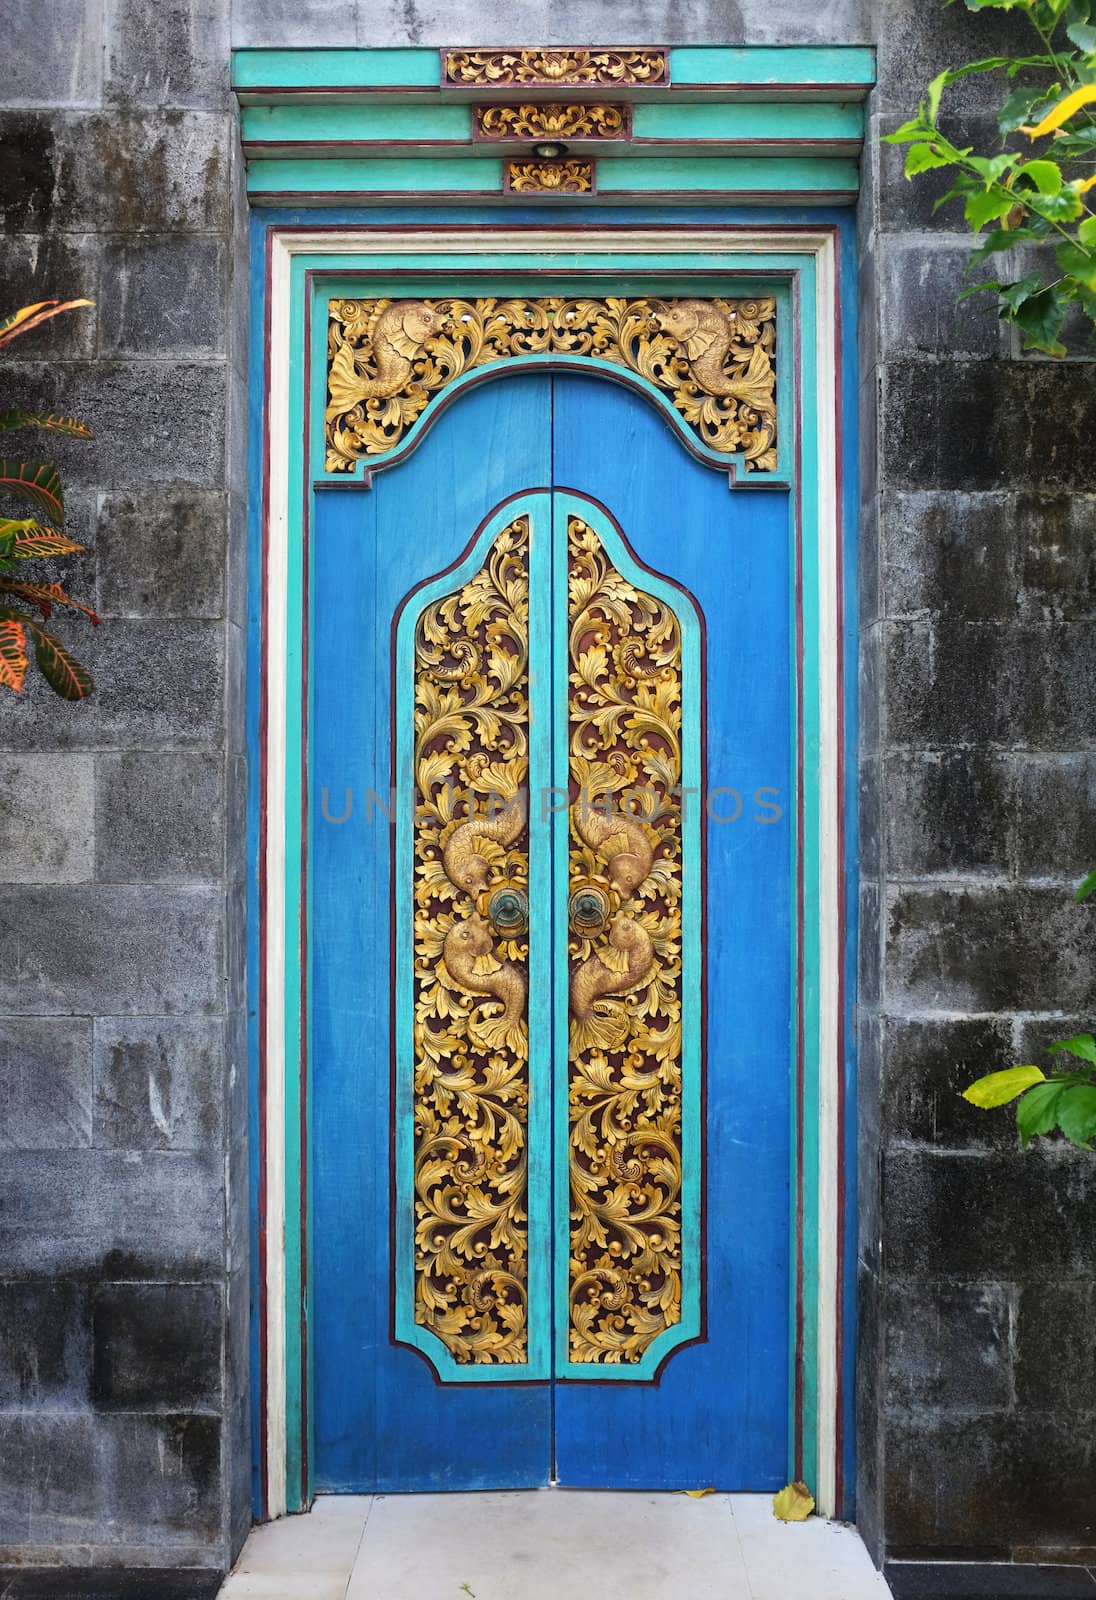 Typical wood carving doors in Bali